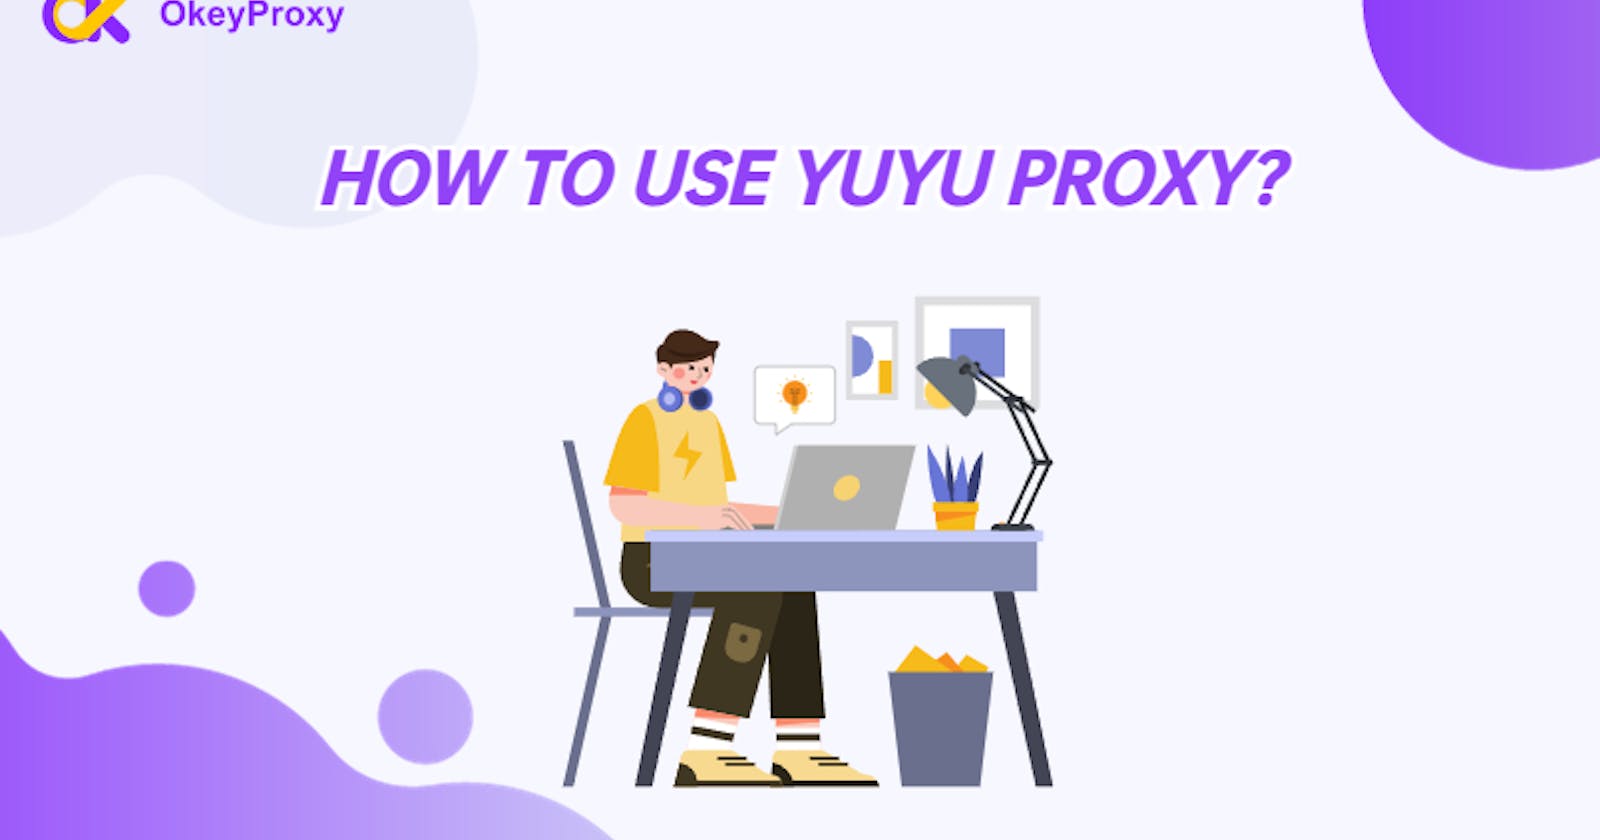 How to Use yuyu Proxy Step by Step